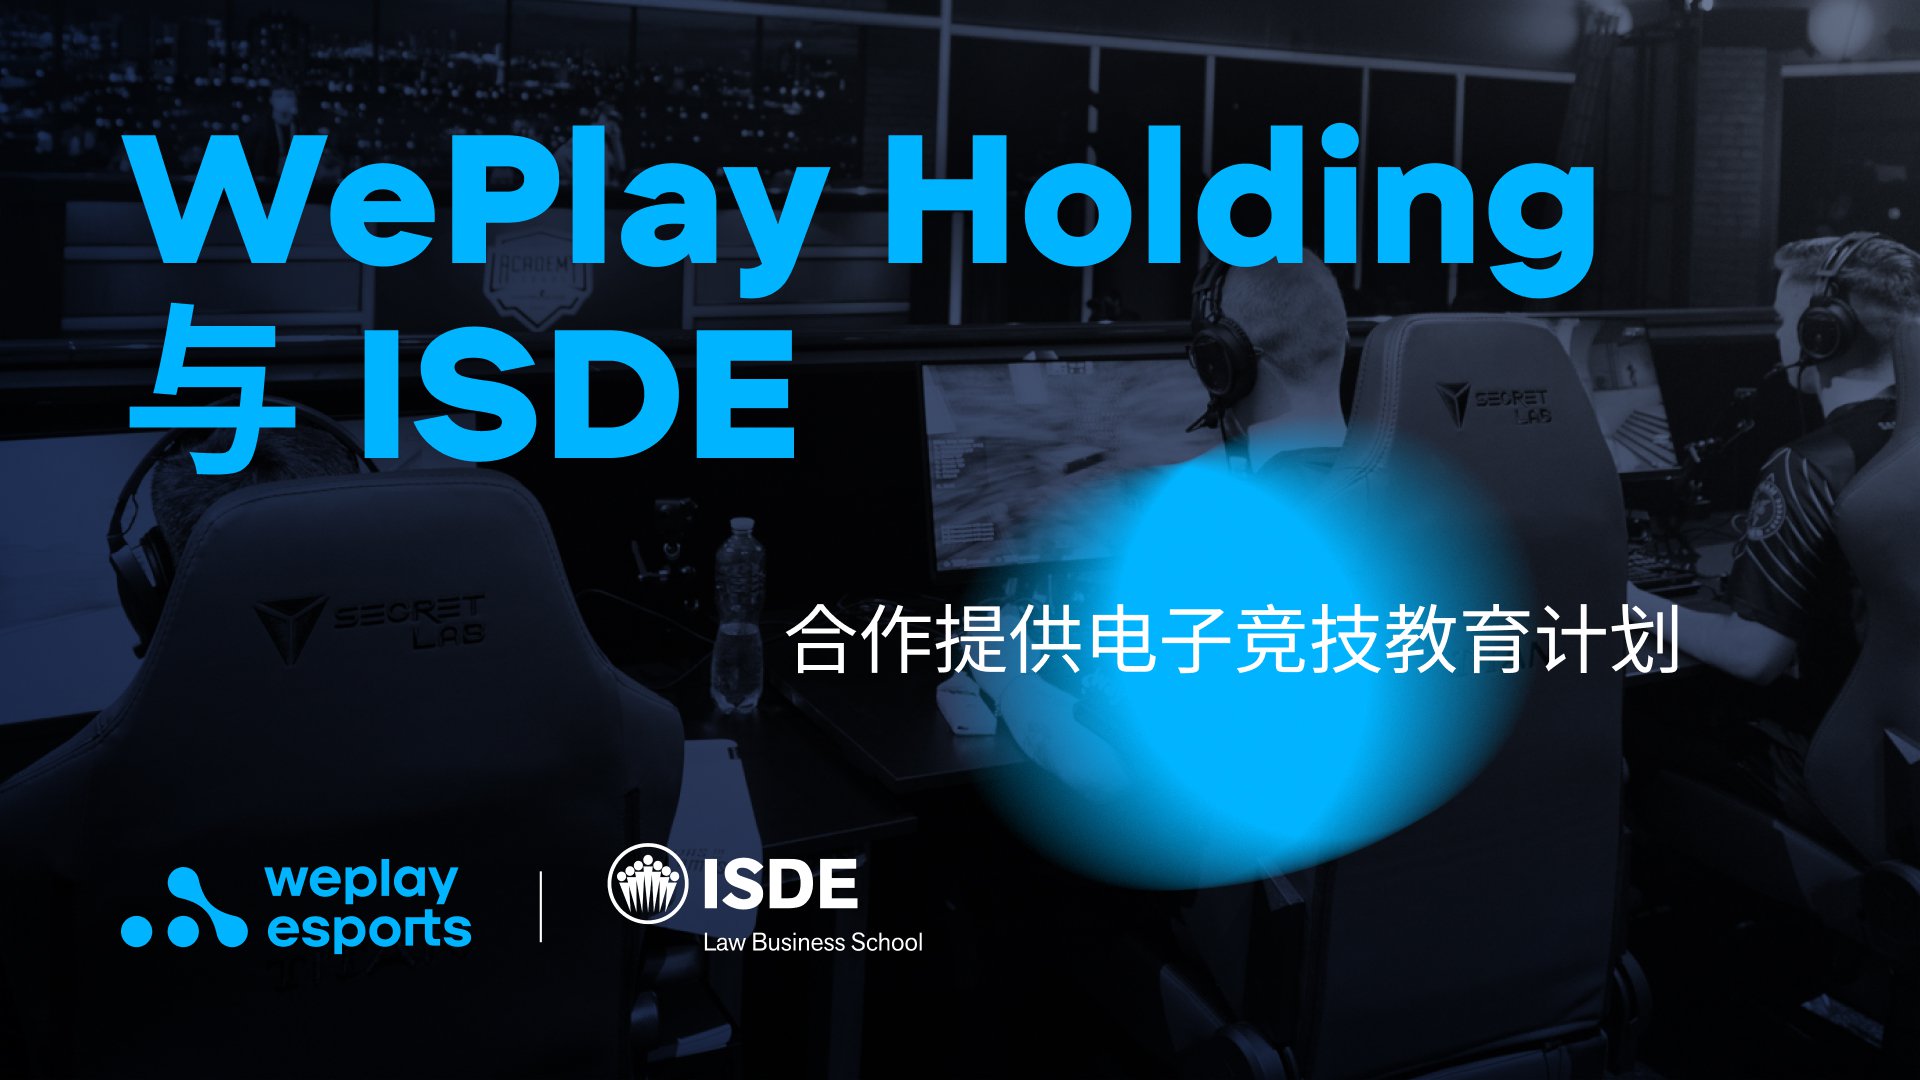 WePlay Holding 与 ISDE 合作提供电子竞技教育计划。图像： WePlay Holding